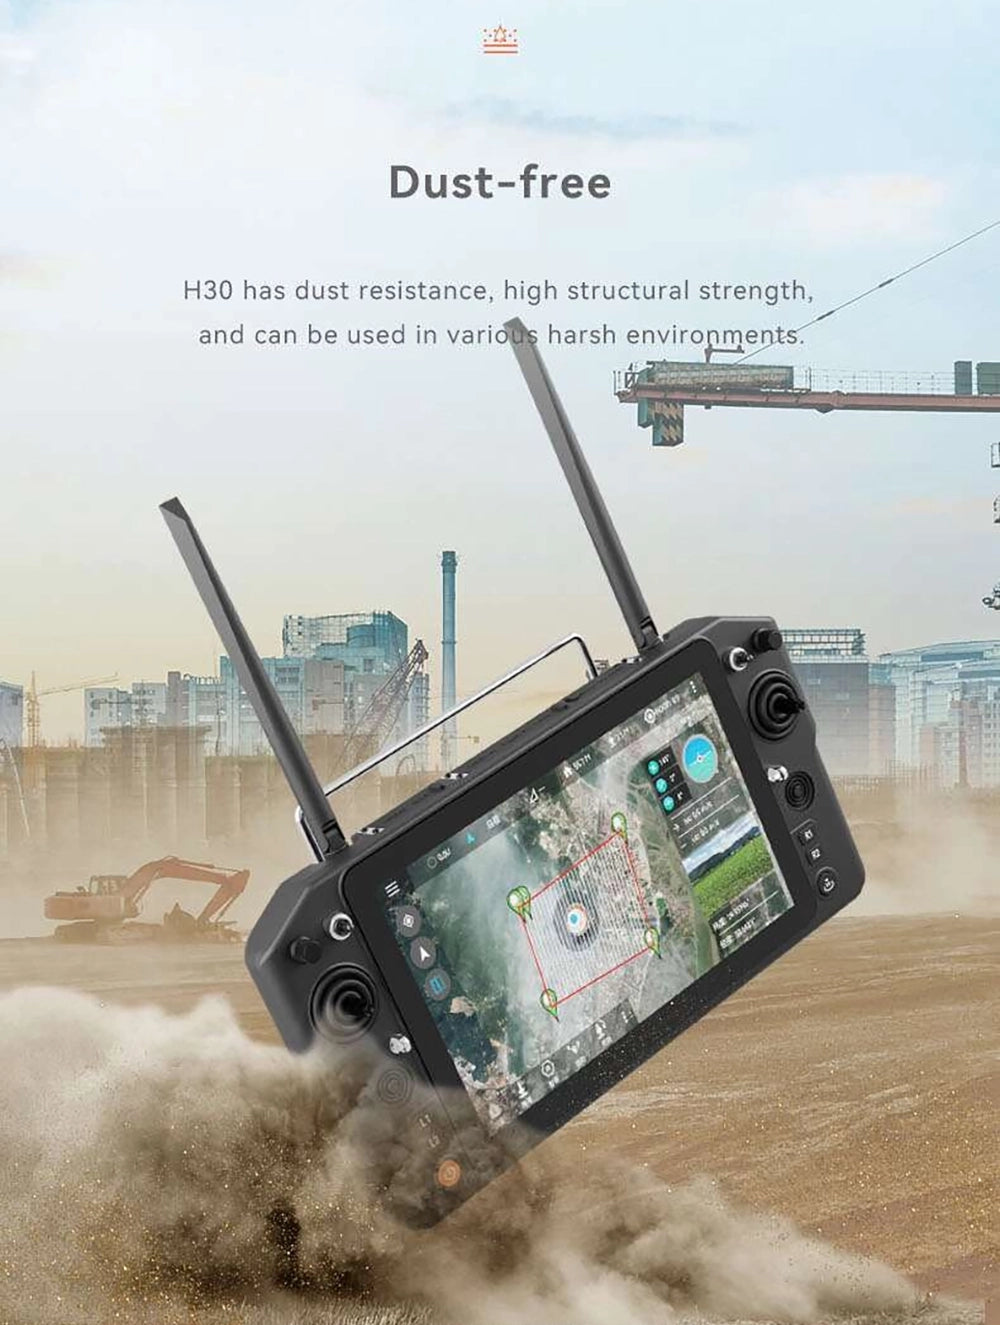 Skydroid H30 Remote Controller, dust-free H30 has dust resistance, high structural strength, and can be used in various